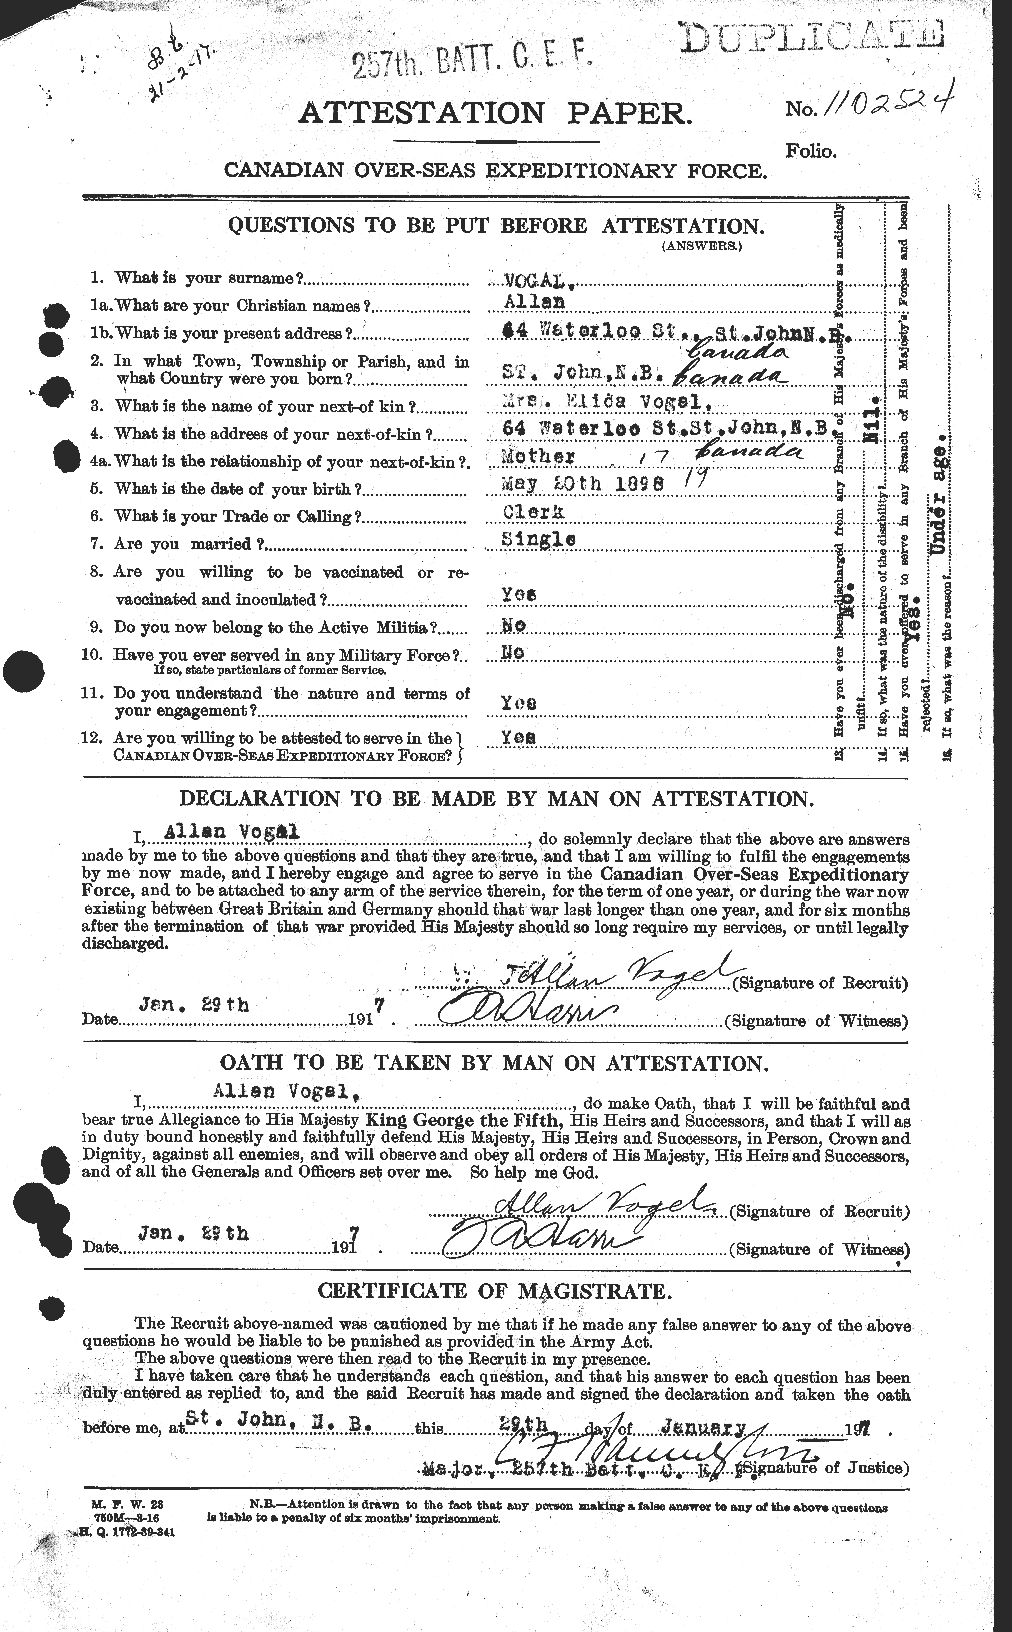 Personnel Records of the First World War - CEF 650575a